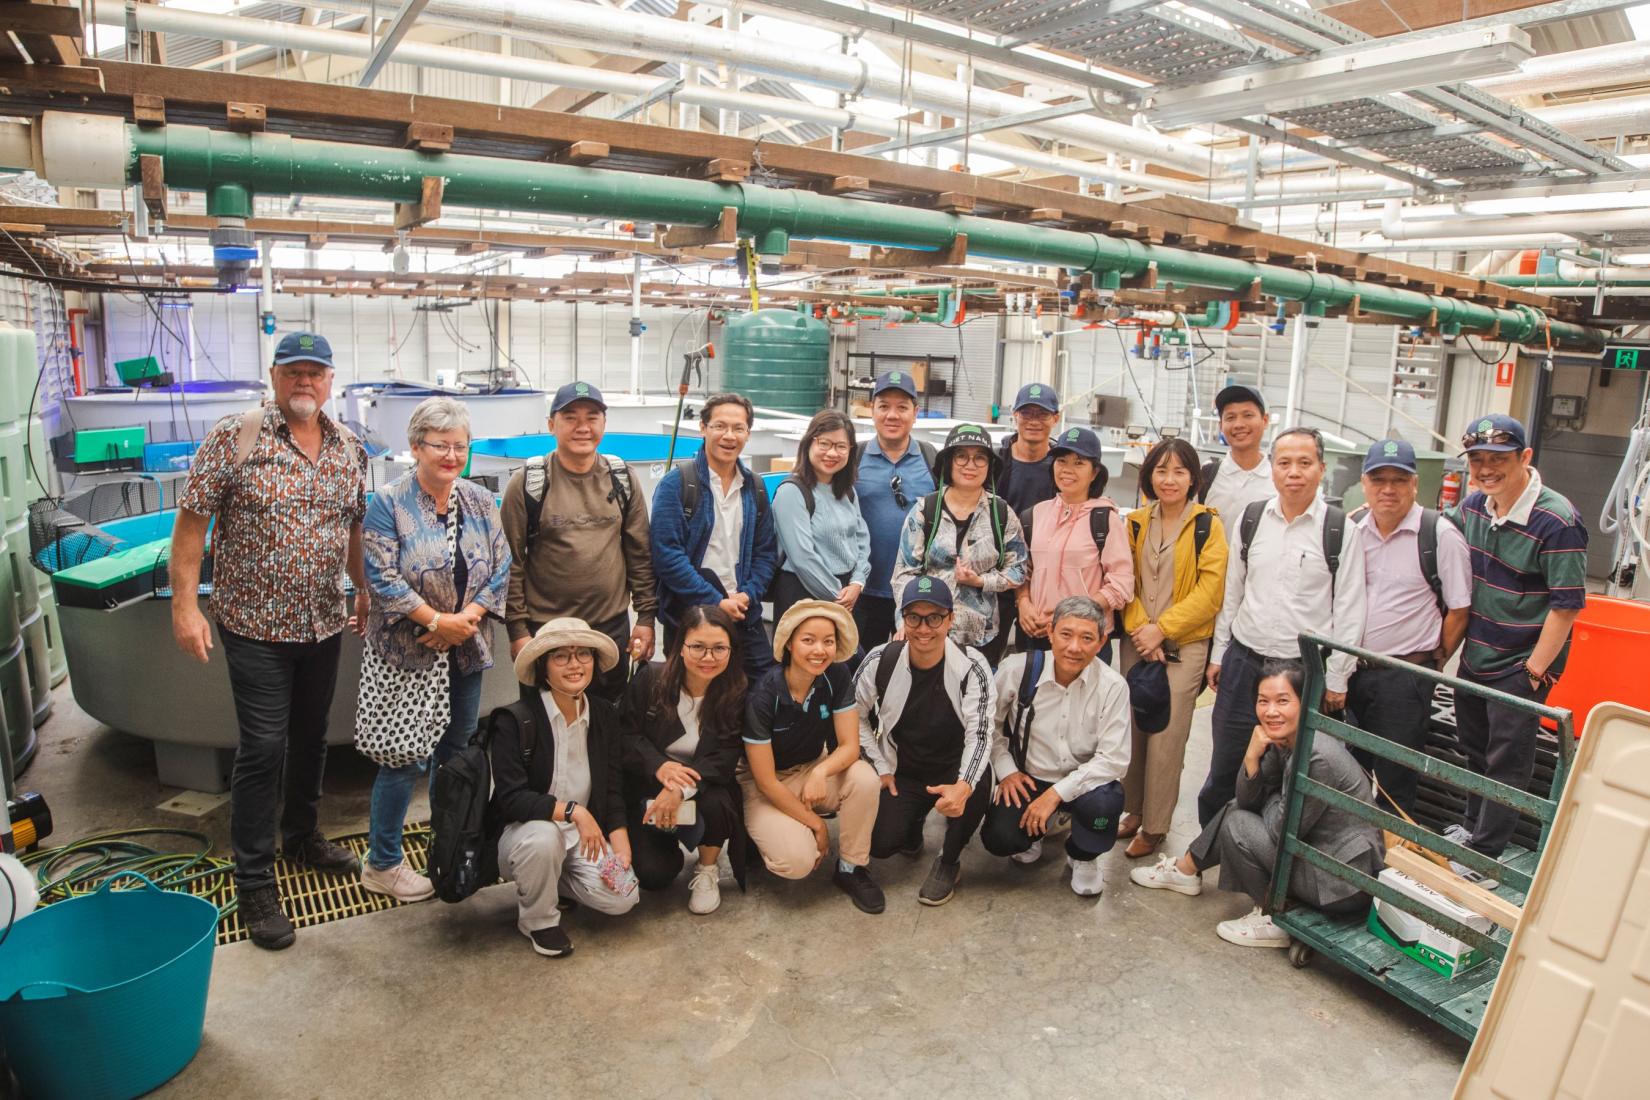 A group of people smiling visiting a research facility